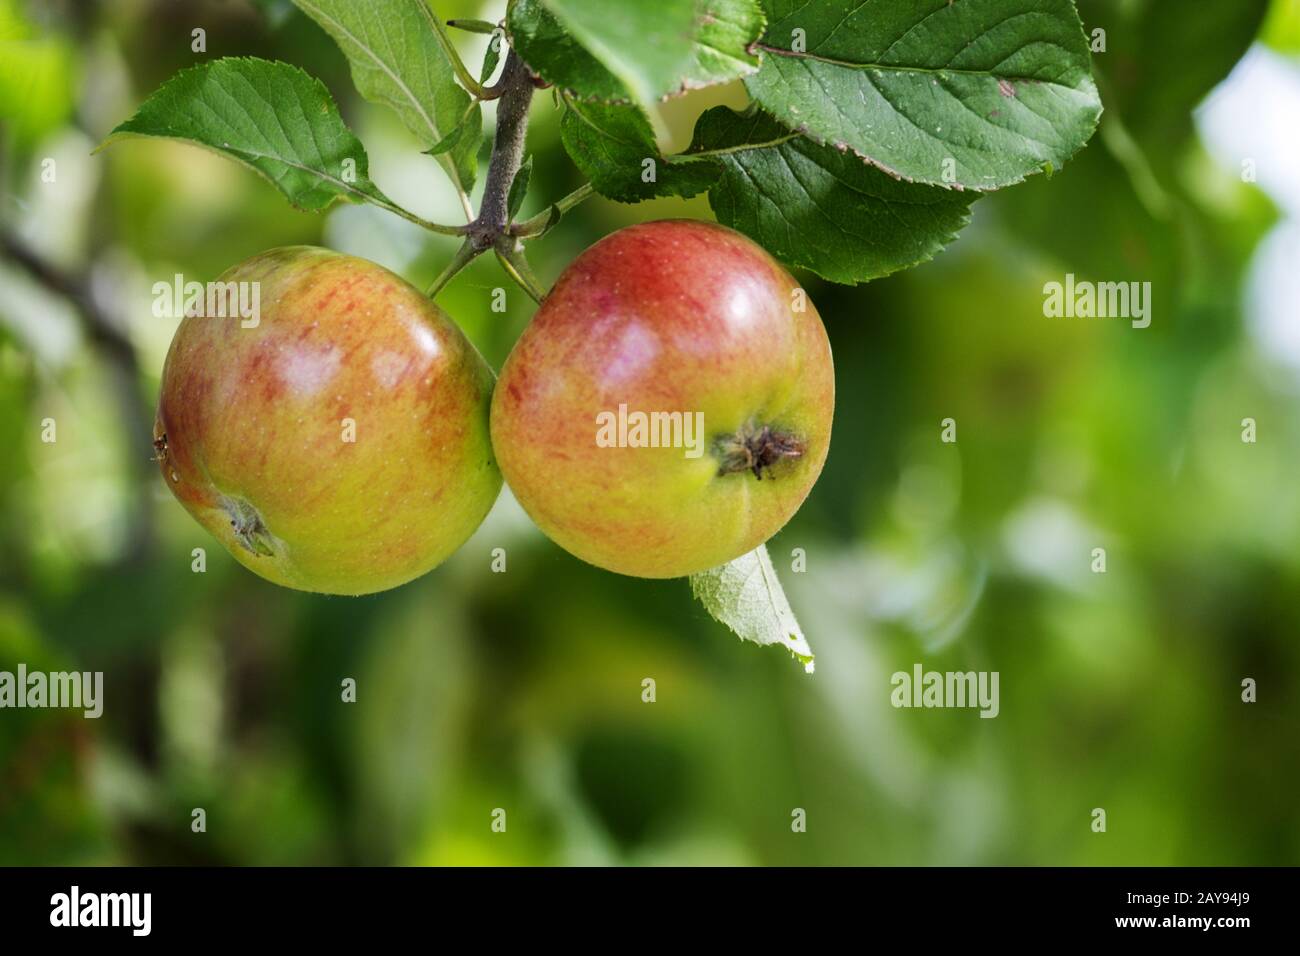 Apples (Malus) on the tree Stock Photo